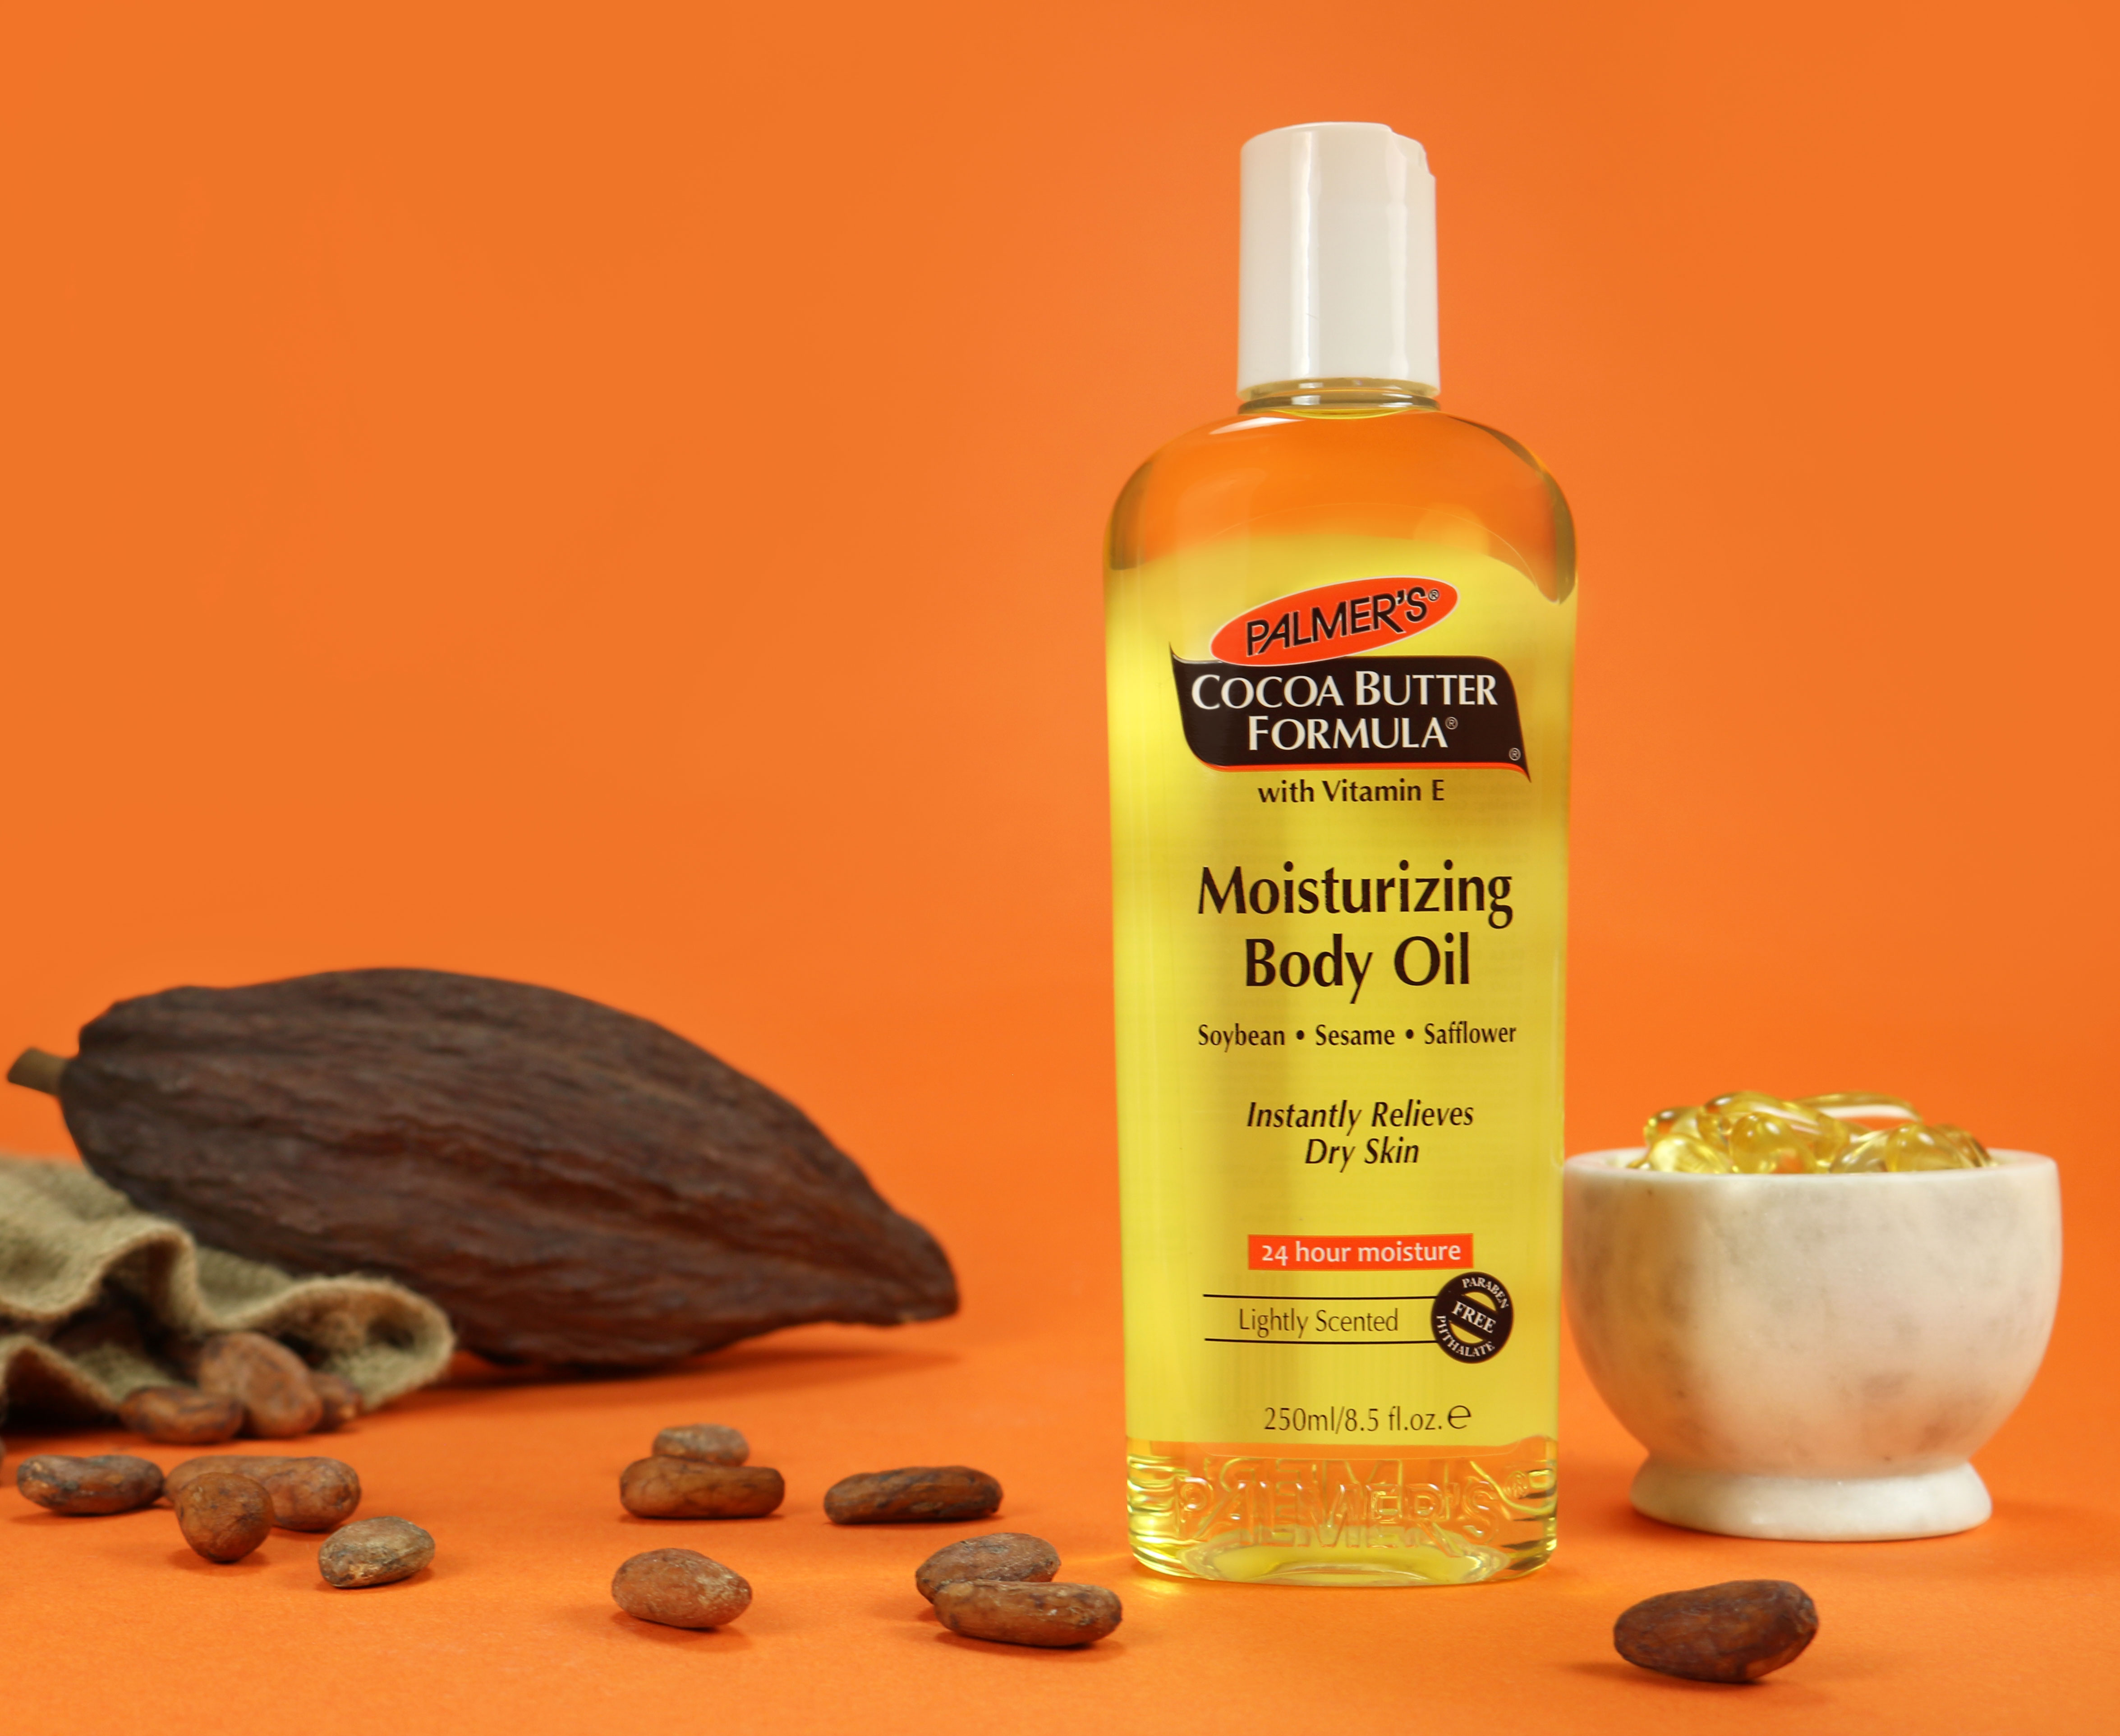 Palmer's Cocoa Butter Formula Moisturizing Body Oil for beauty treatments at home